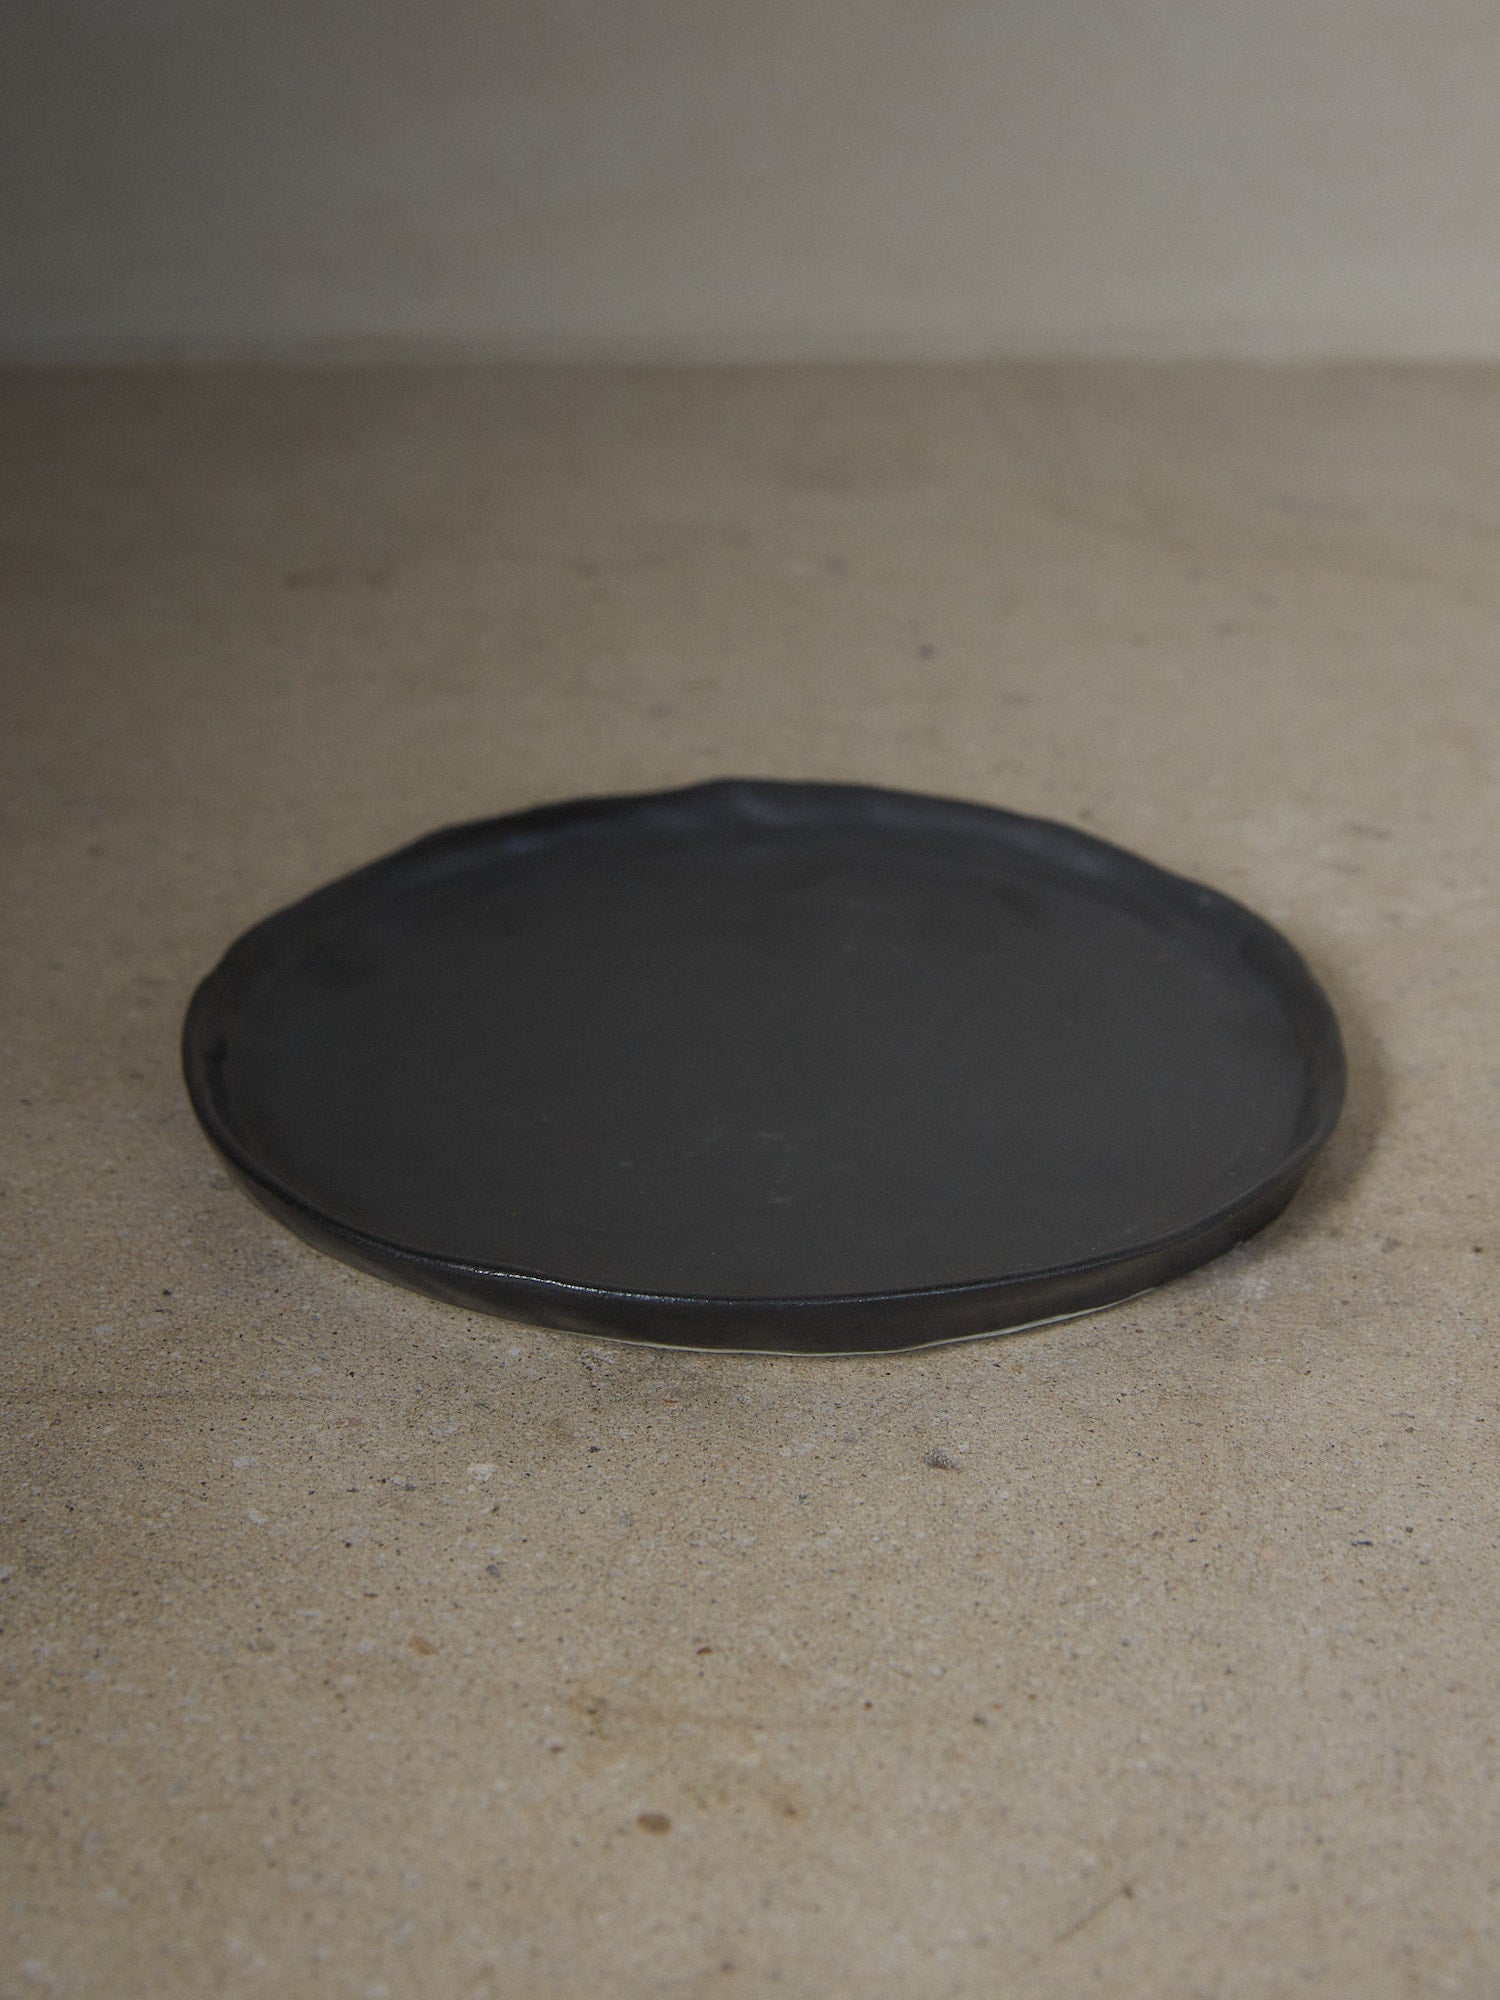 Raw Black Salad Plate. A hand-formed stoneware salad plate recalling the organic and natural world with perfectly imperfect edges in a classic matte black finish.